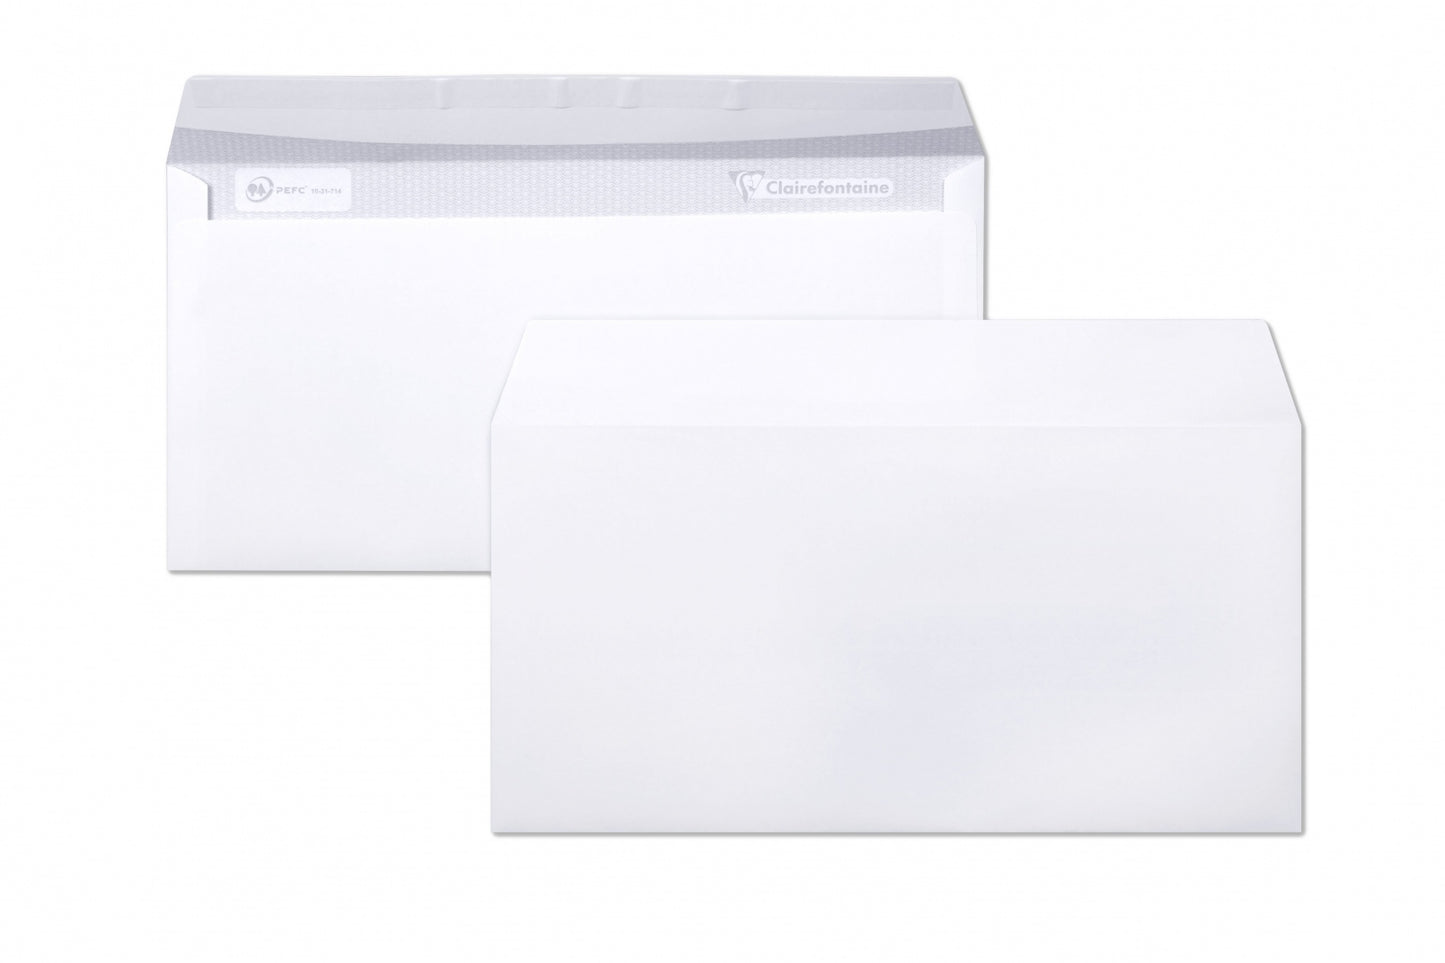 Clairefontaine #9915 Triomphe Self-Sealing Tissue Lined Envelopes (4.375 x 8.625) (25 ea)